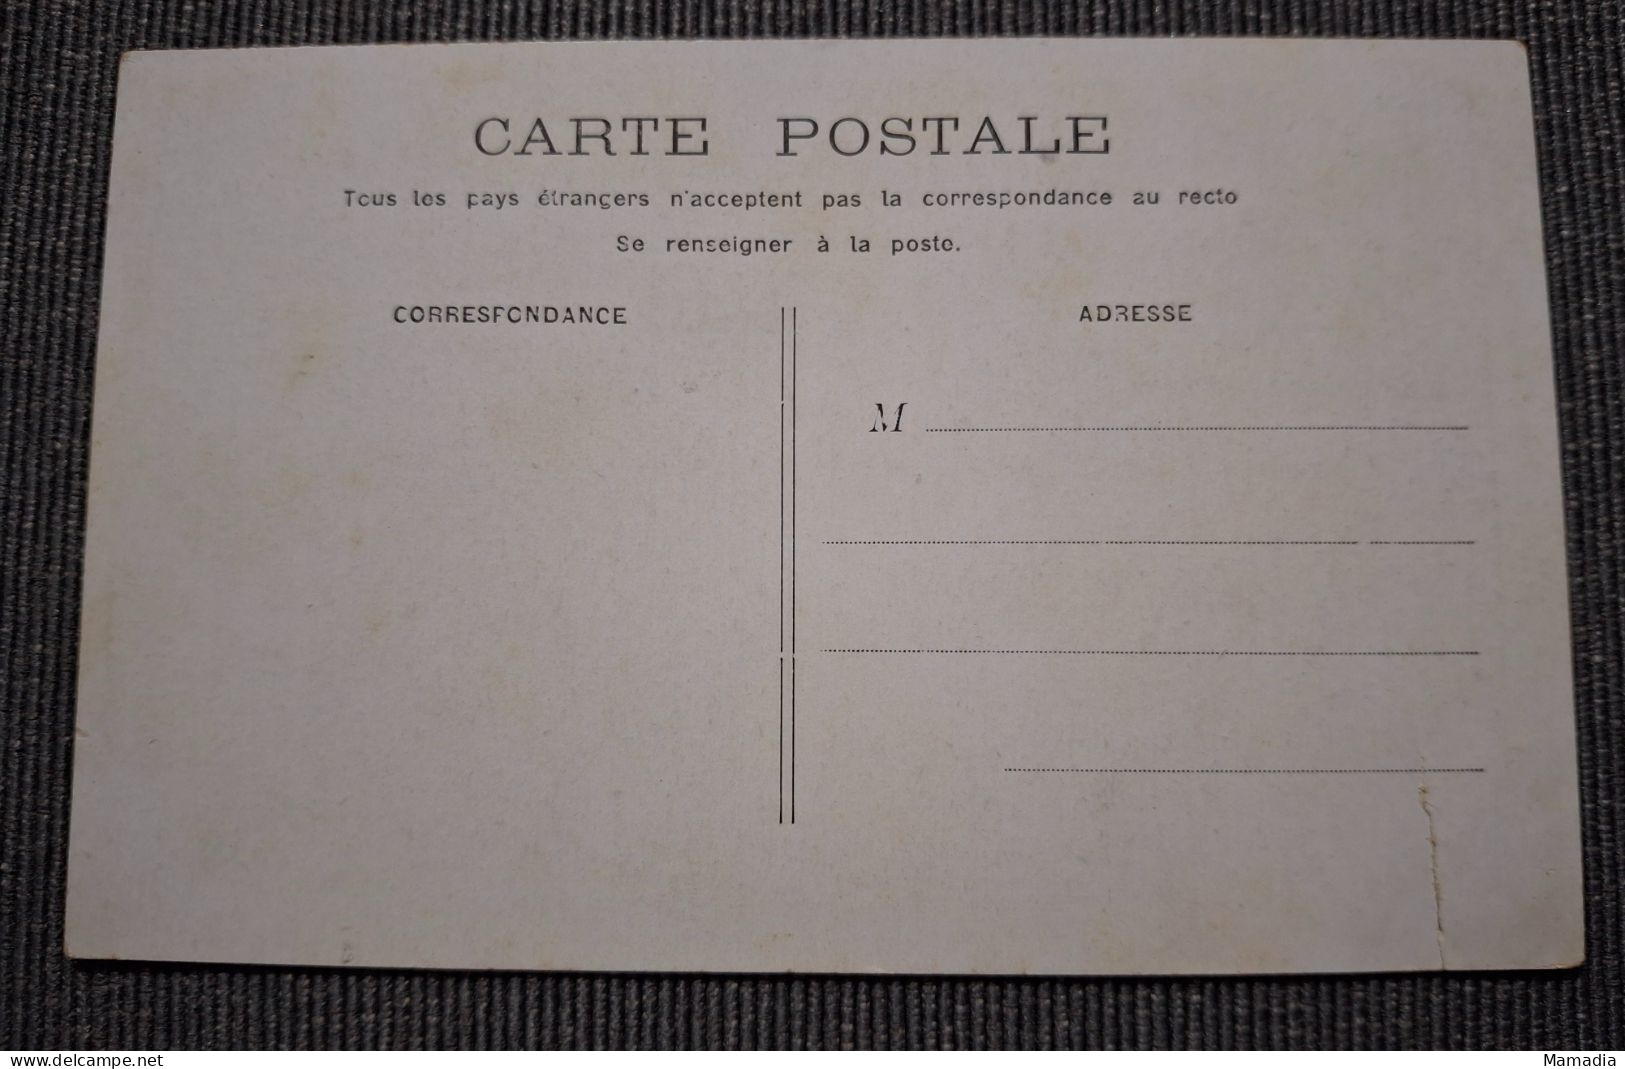 CARTE POSTALE ANCIENNE CYCLE VELO SERIE "MADEMOISELLE ECOUTEZ-MOI DONC" N°1 / 6 - Paare